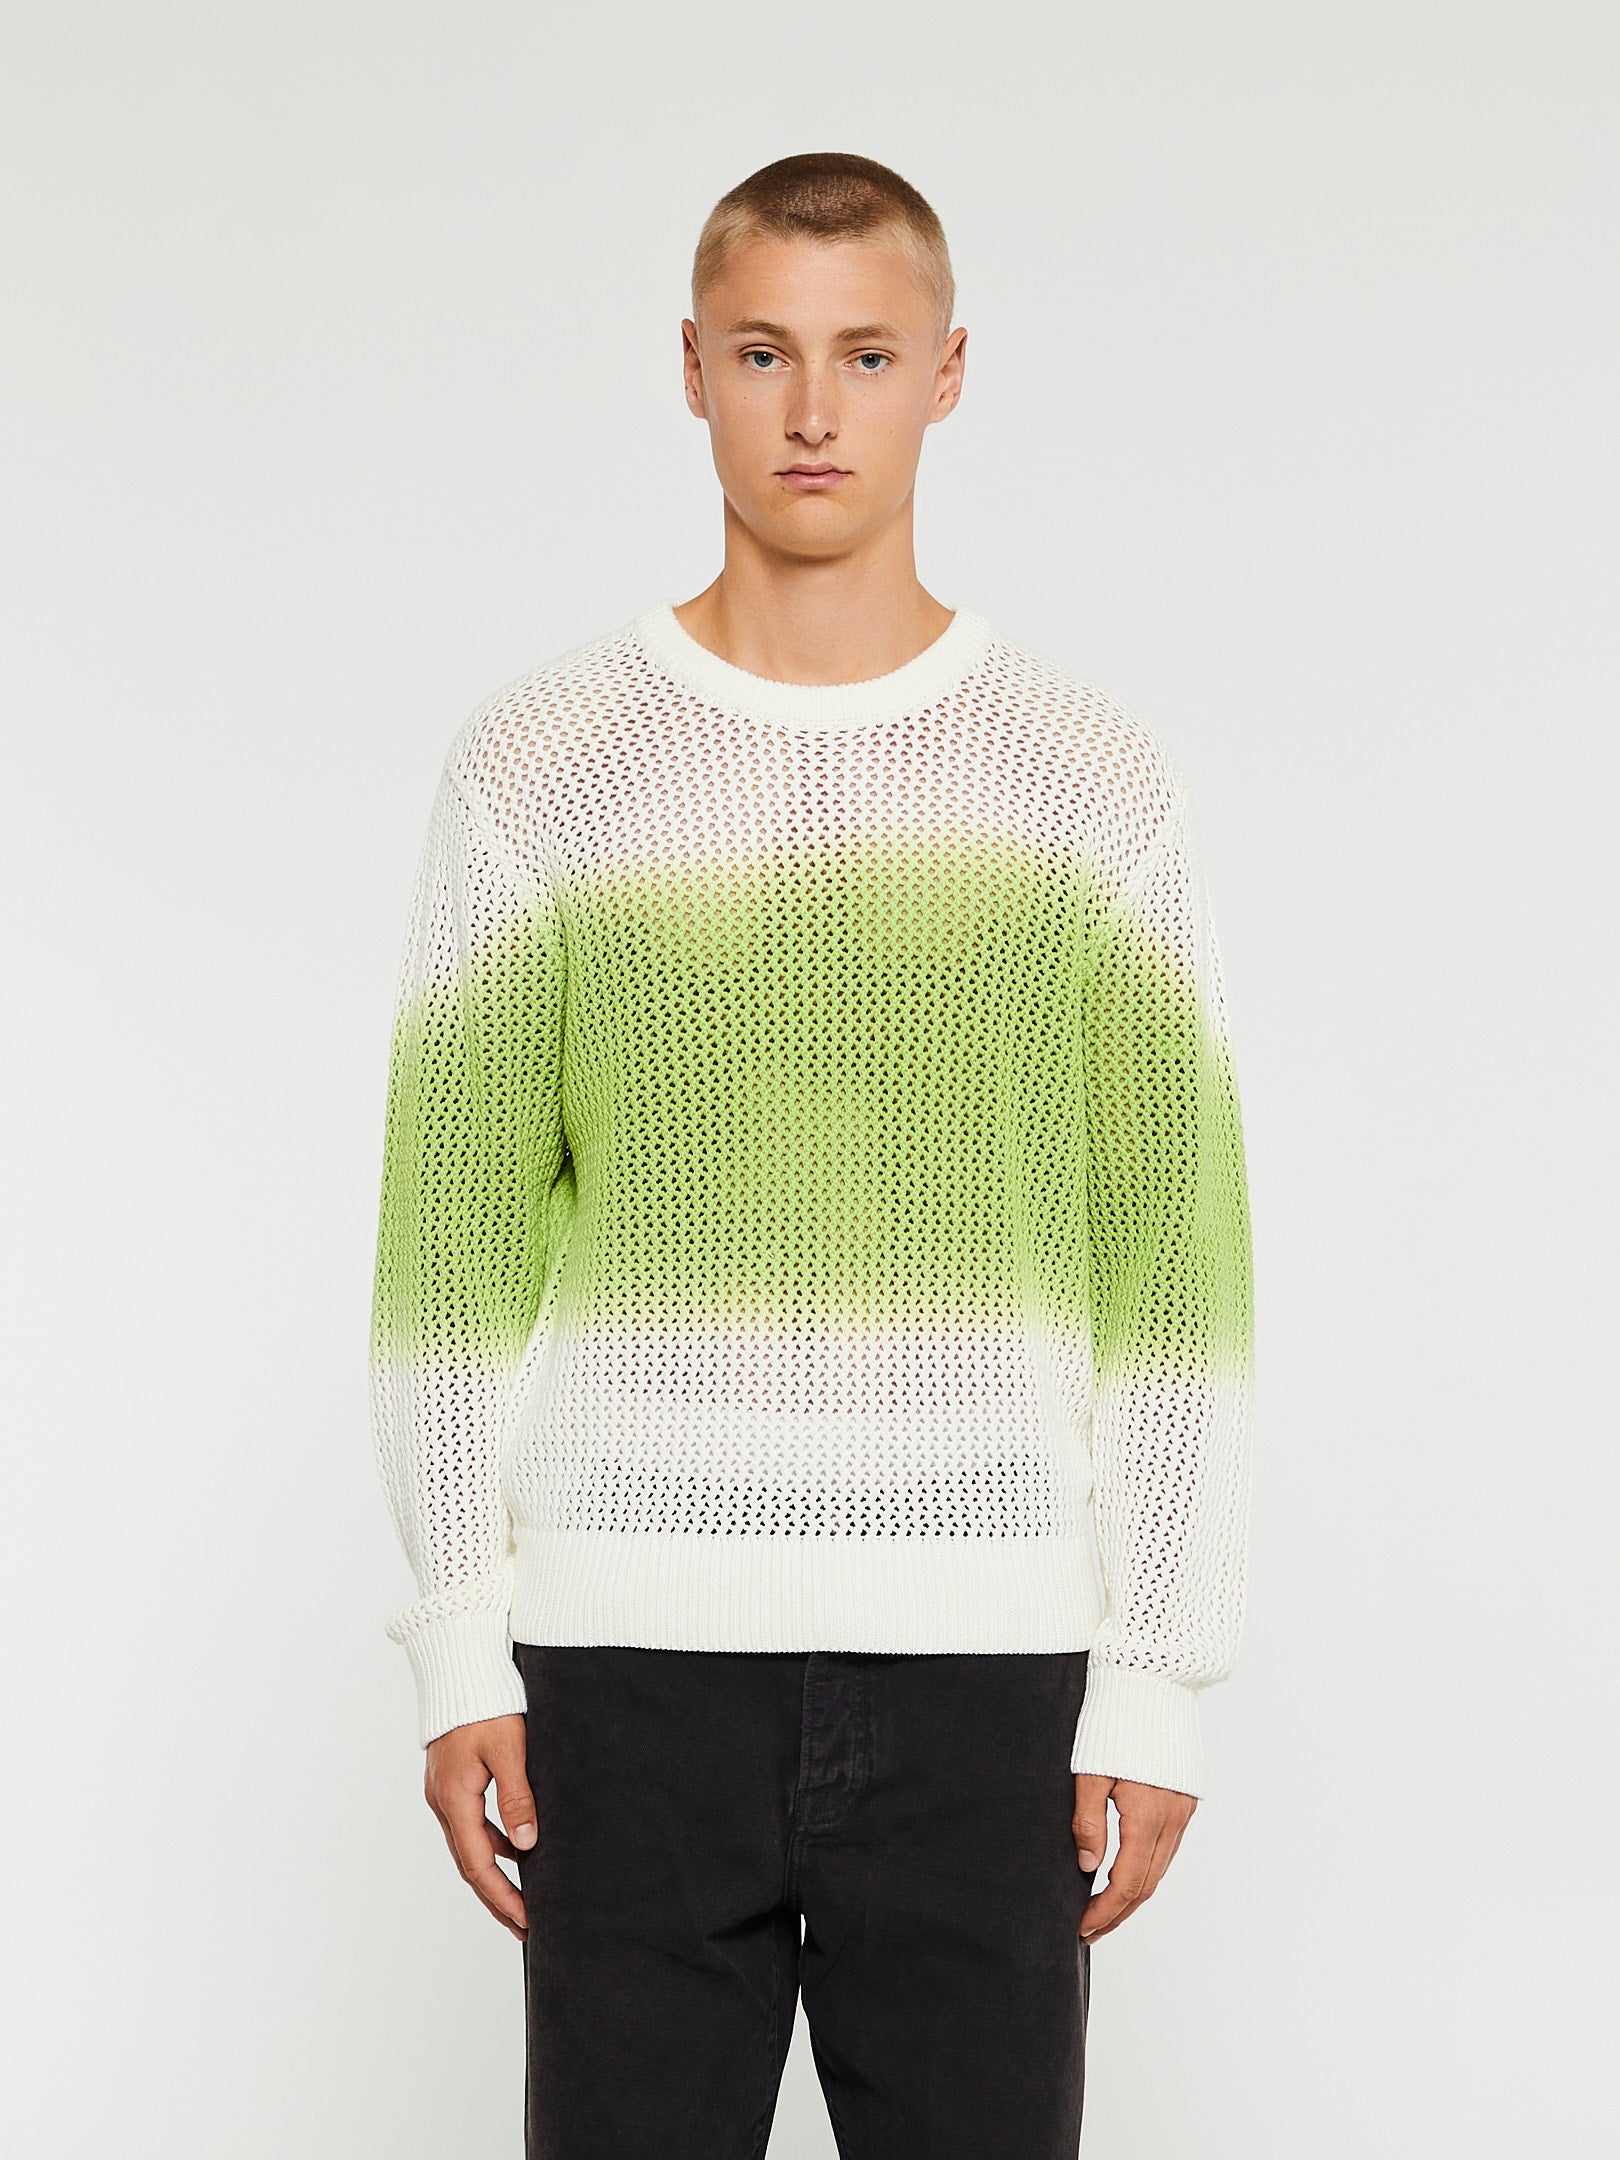 Pigment Dyed Loose Gauge Sweater in Bright Green